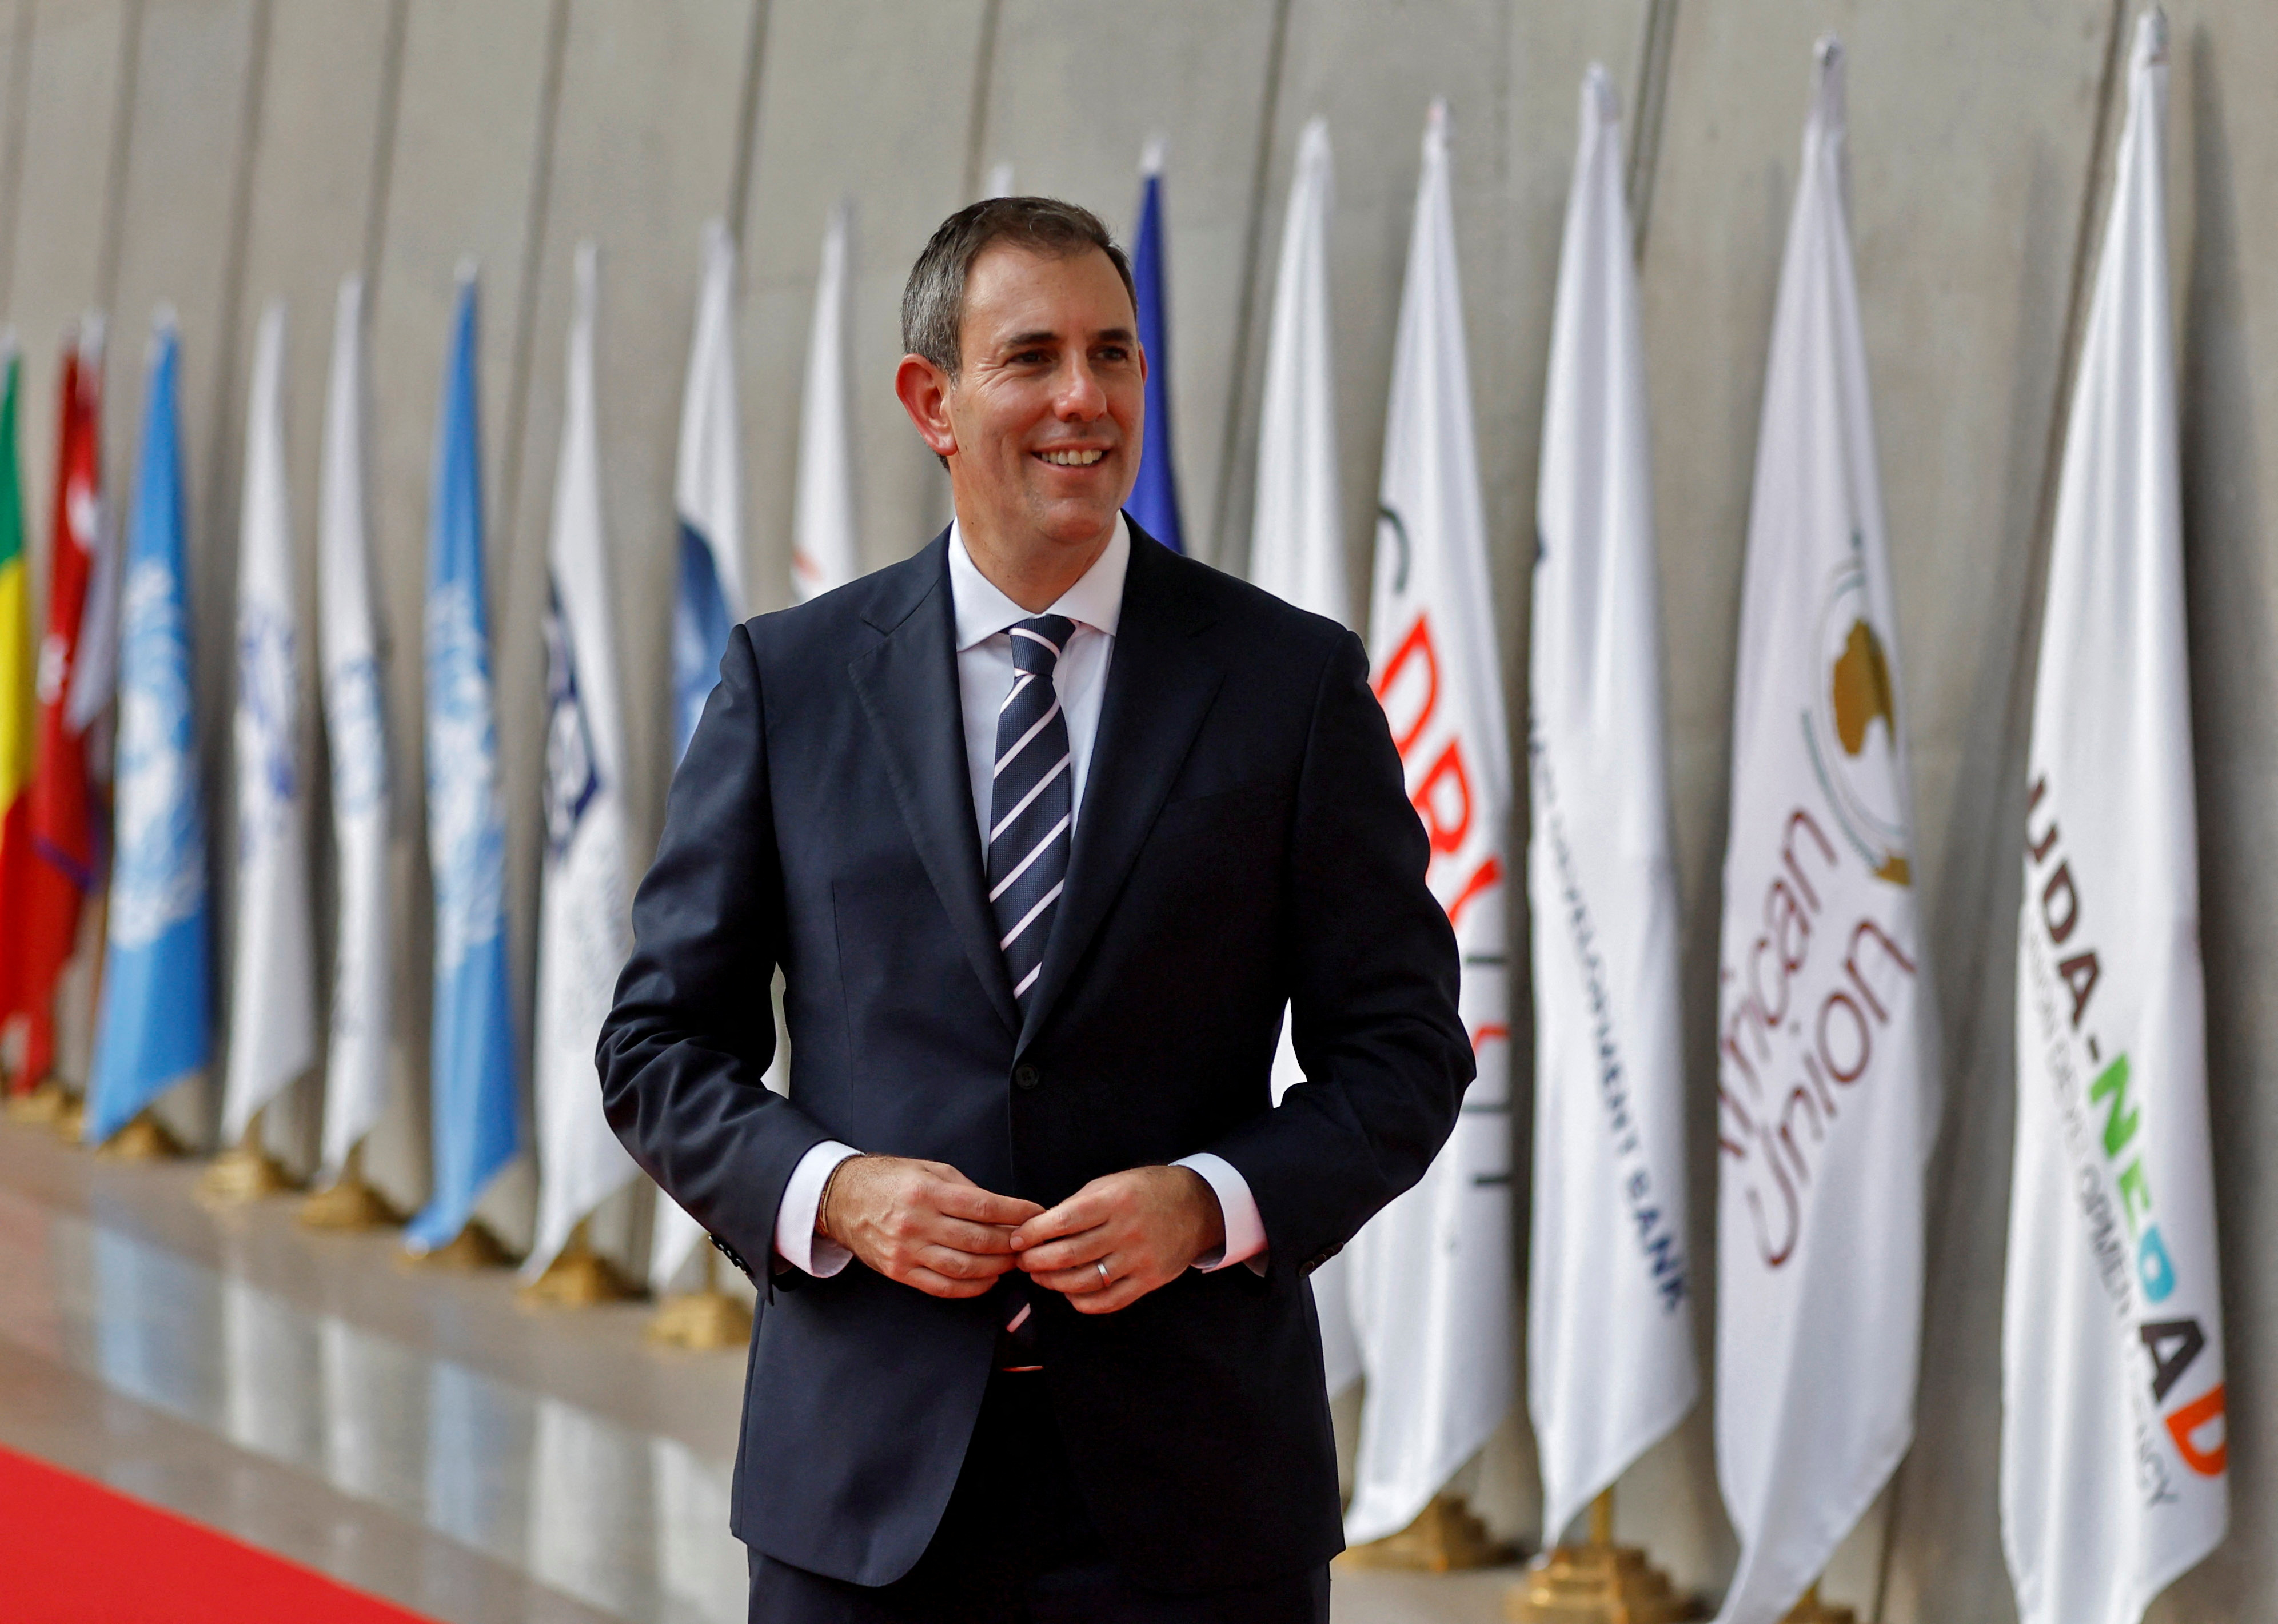 Australian Treasurer Chalmers poses for a photograph as he arrives to attend a G20 finance ministers' and Central Bank governors' meeting at Gandhinagar